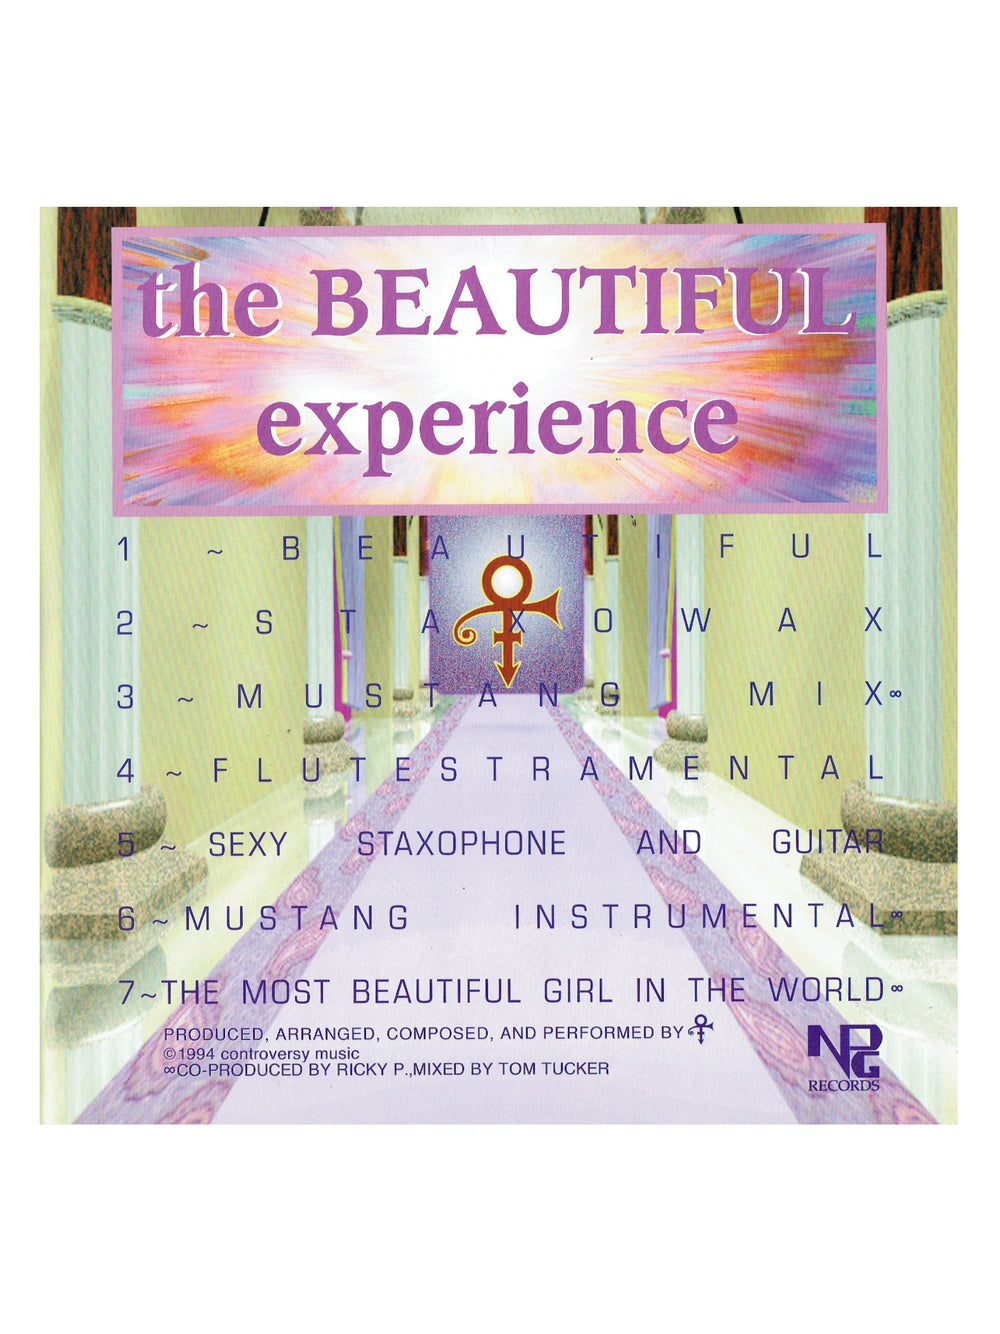 Prince The Beautiful Experience Vinyl Album 7 Tracks WITH BOOKLET & HYPE SMS